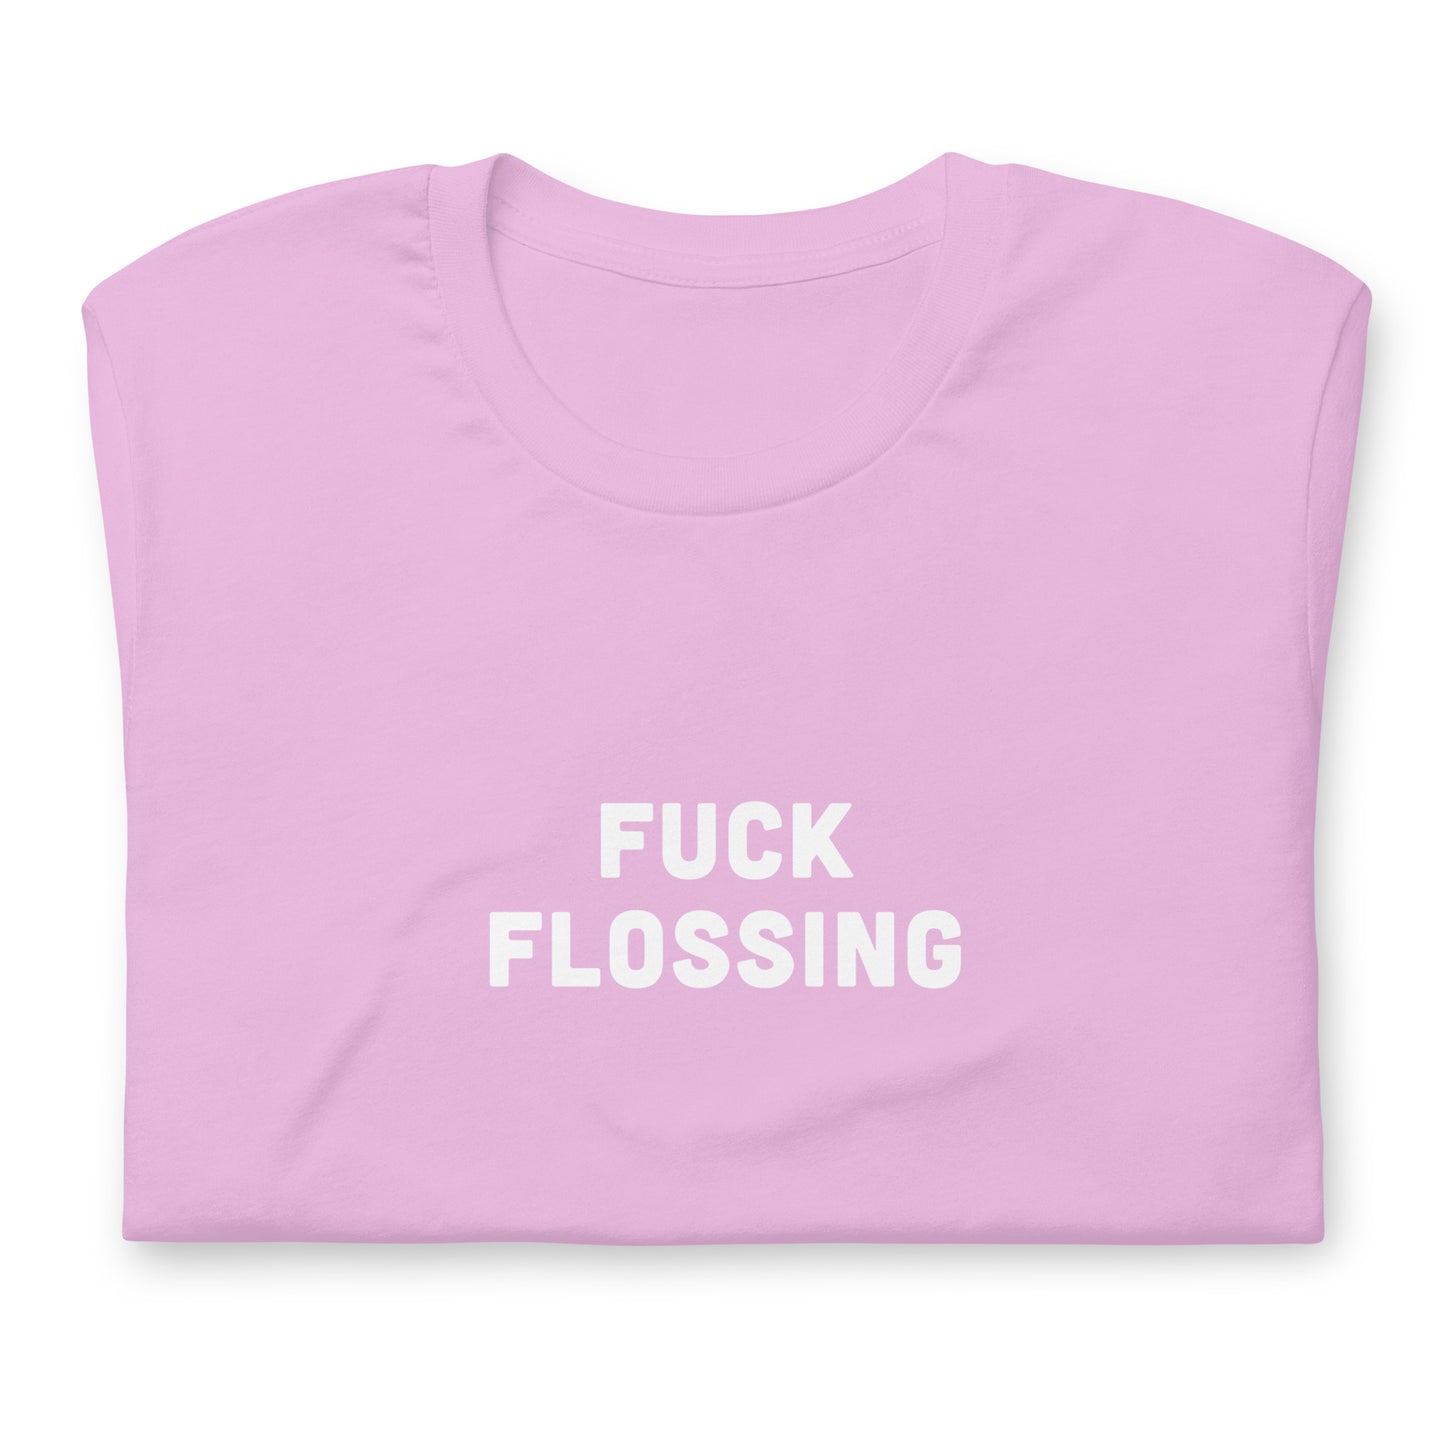 Fuck Flossing T-Shirt Size 2XL Color Forest